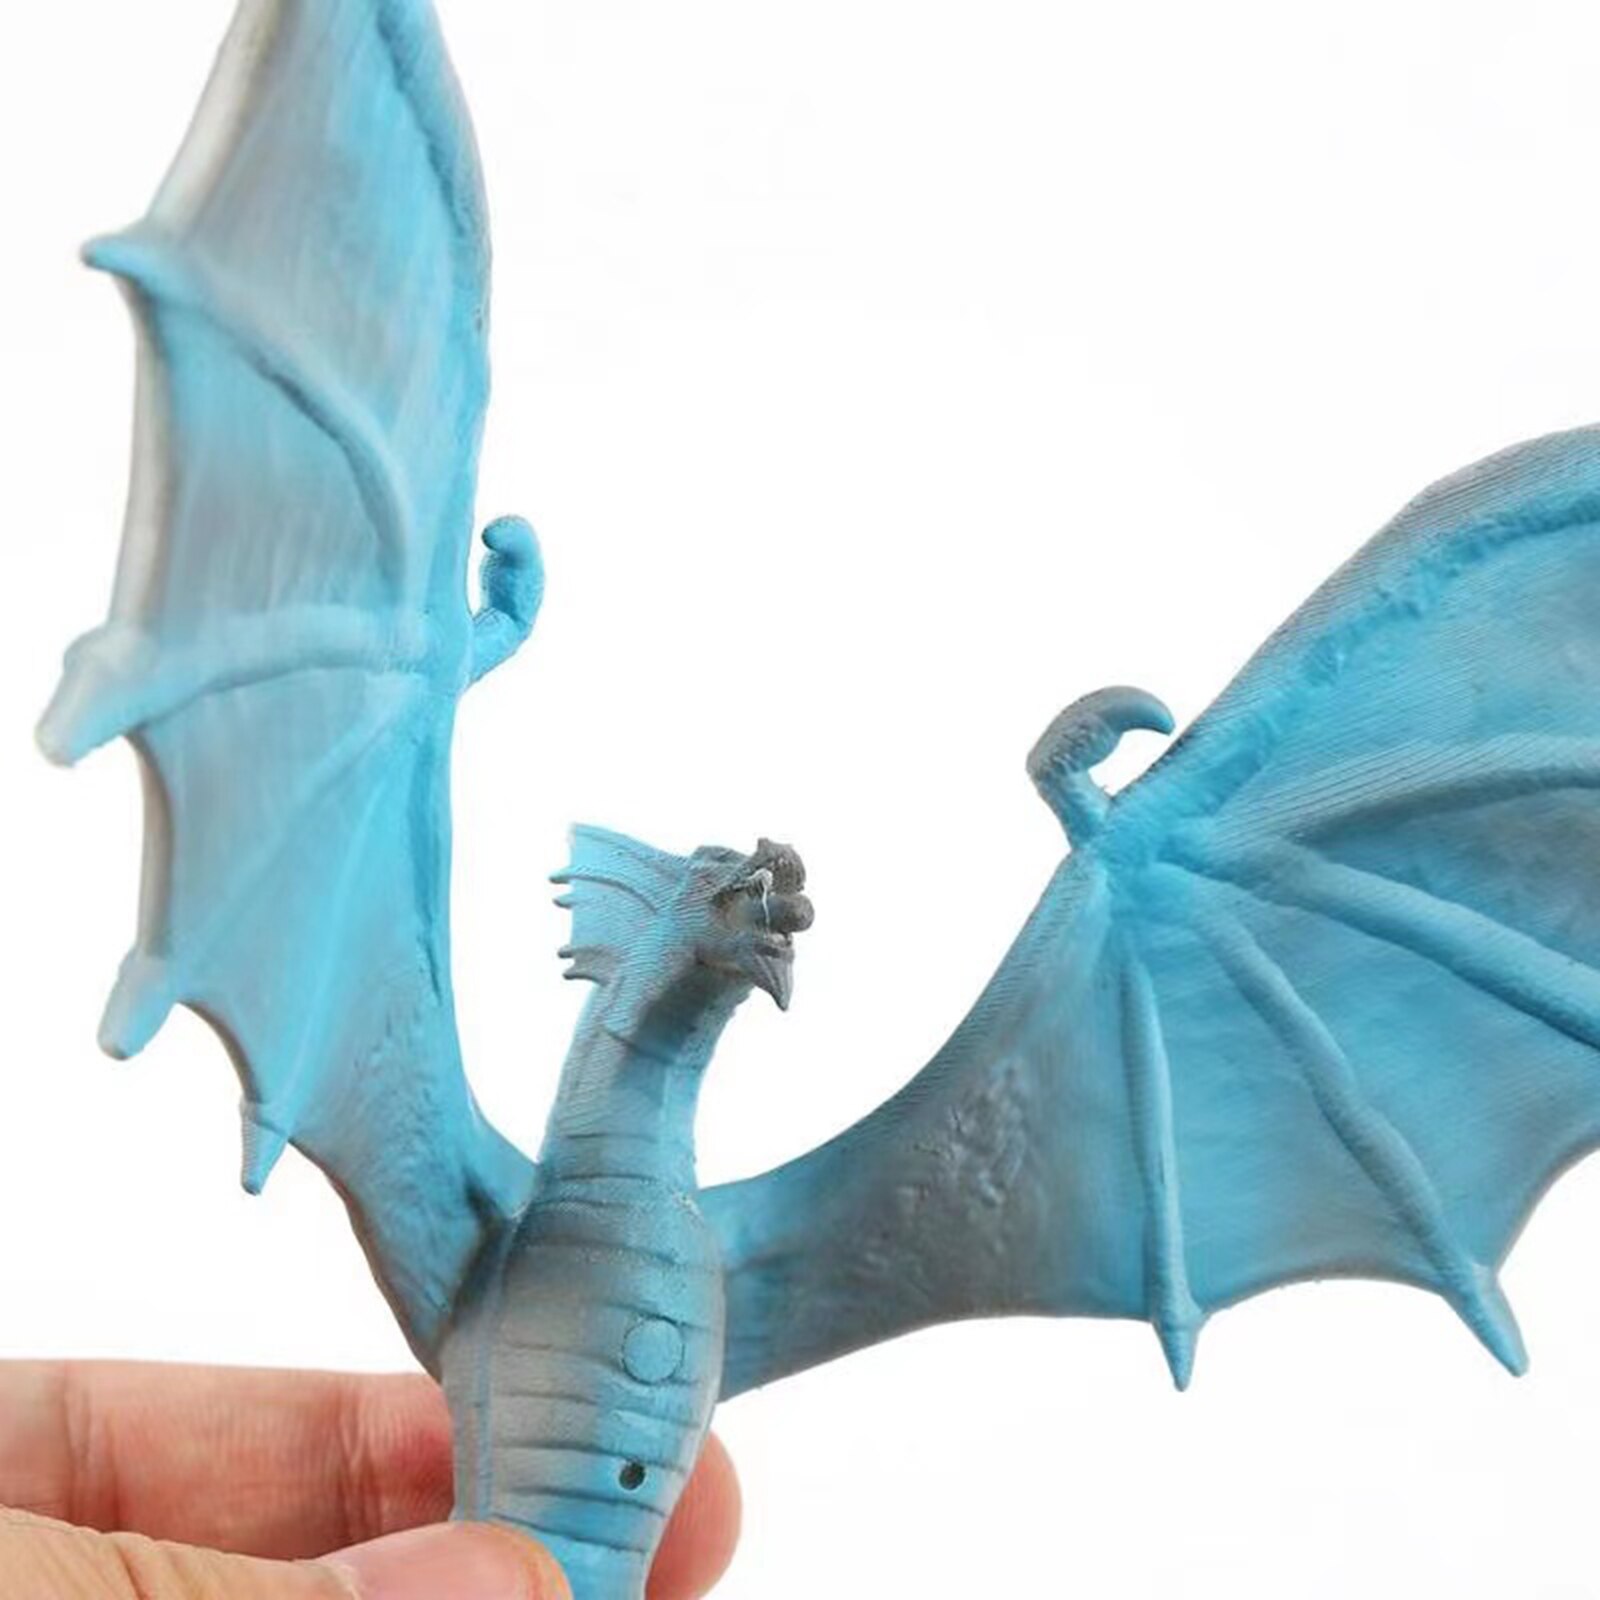 3D Printed LED Night Light USB Rechargeable Dragon Lamps For Home Hot Sale Night Lamp Christmas Decoration Gifts For Kids